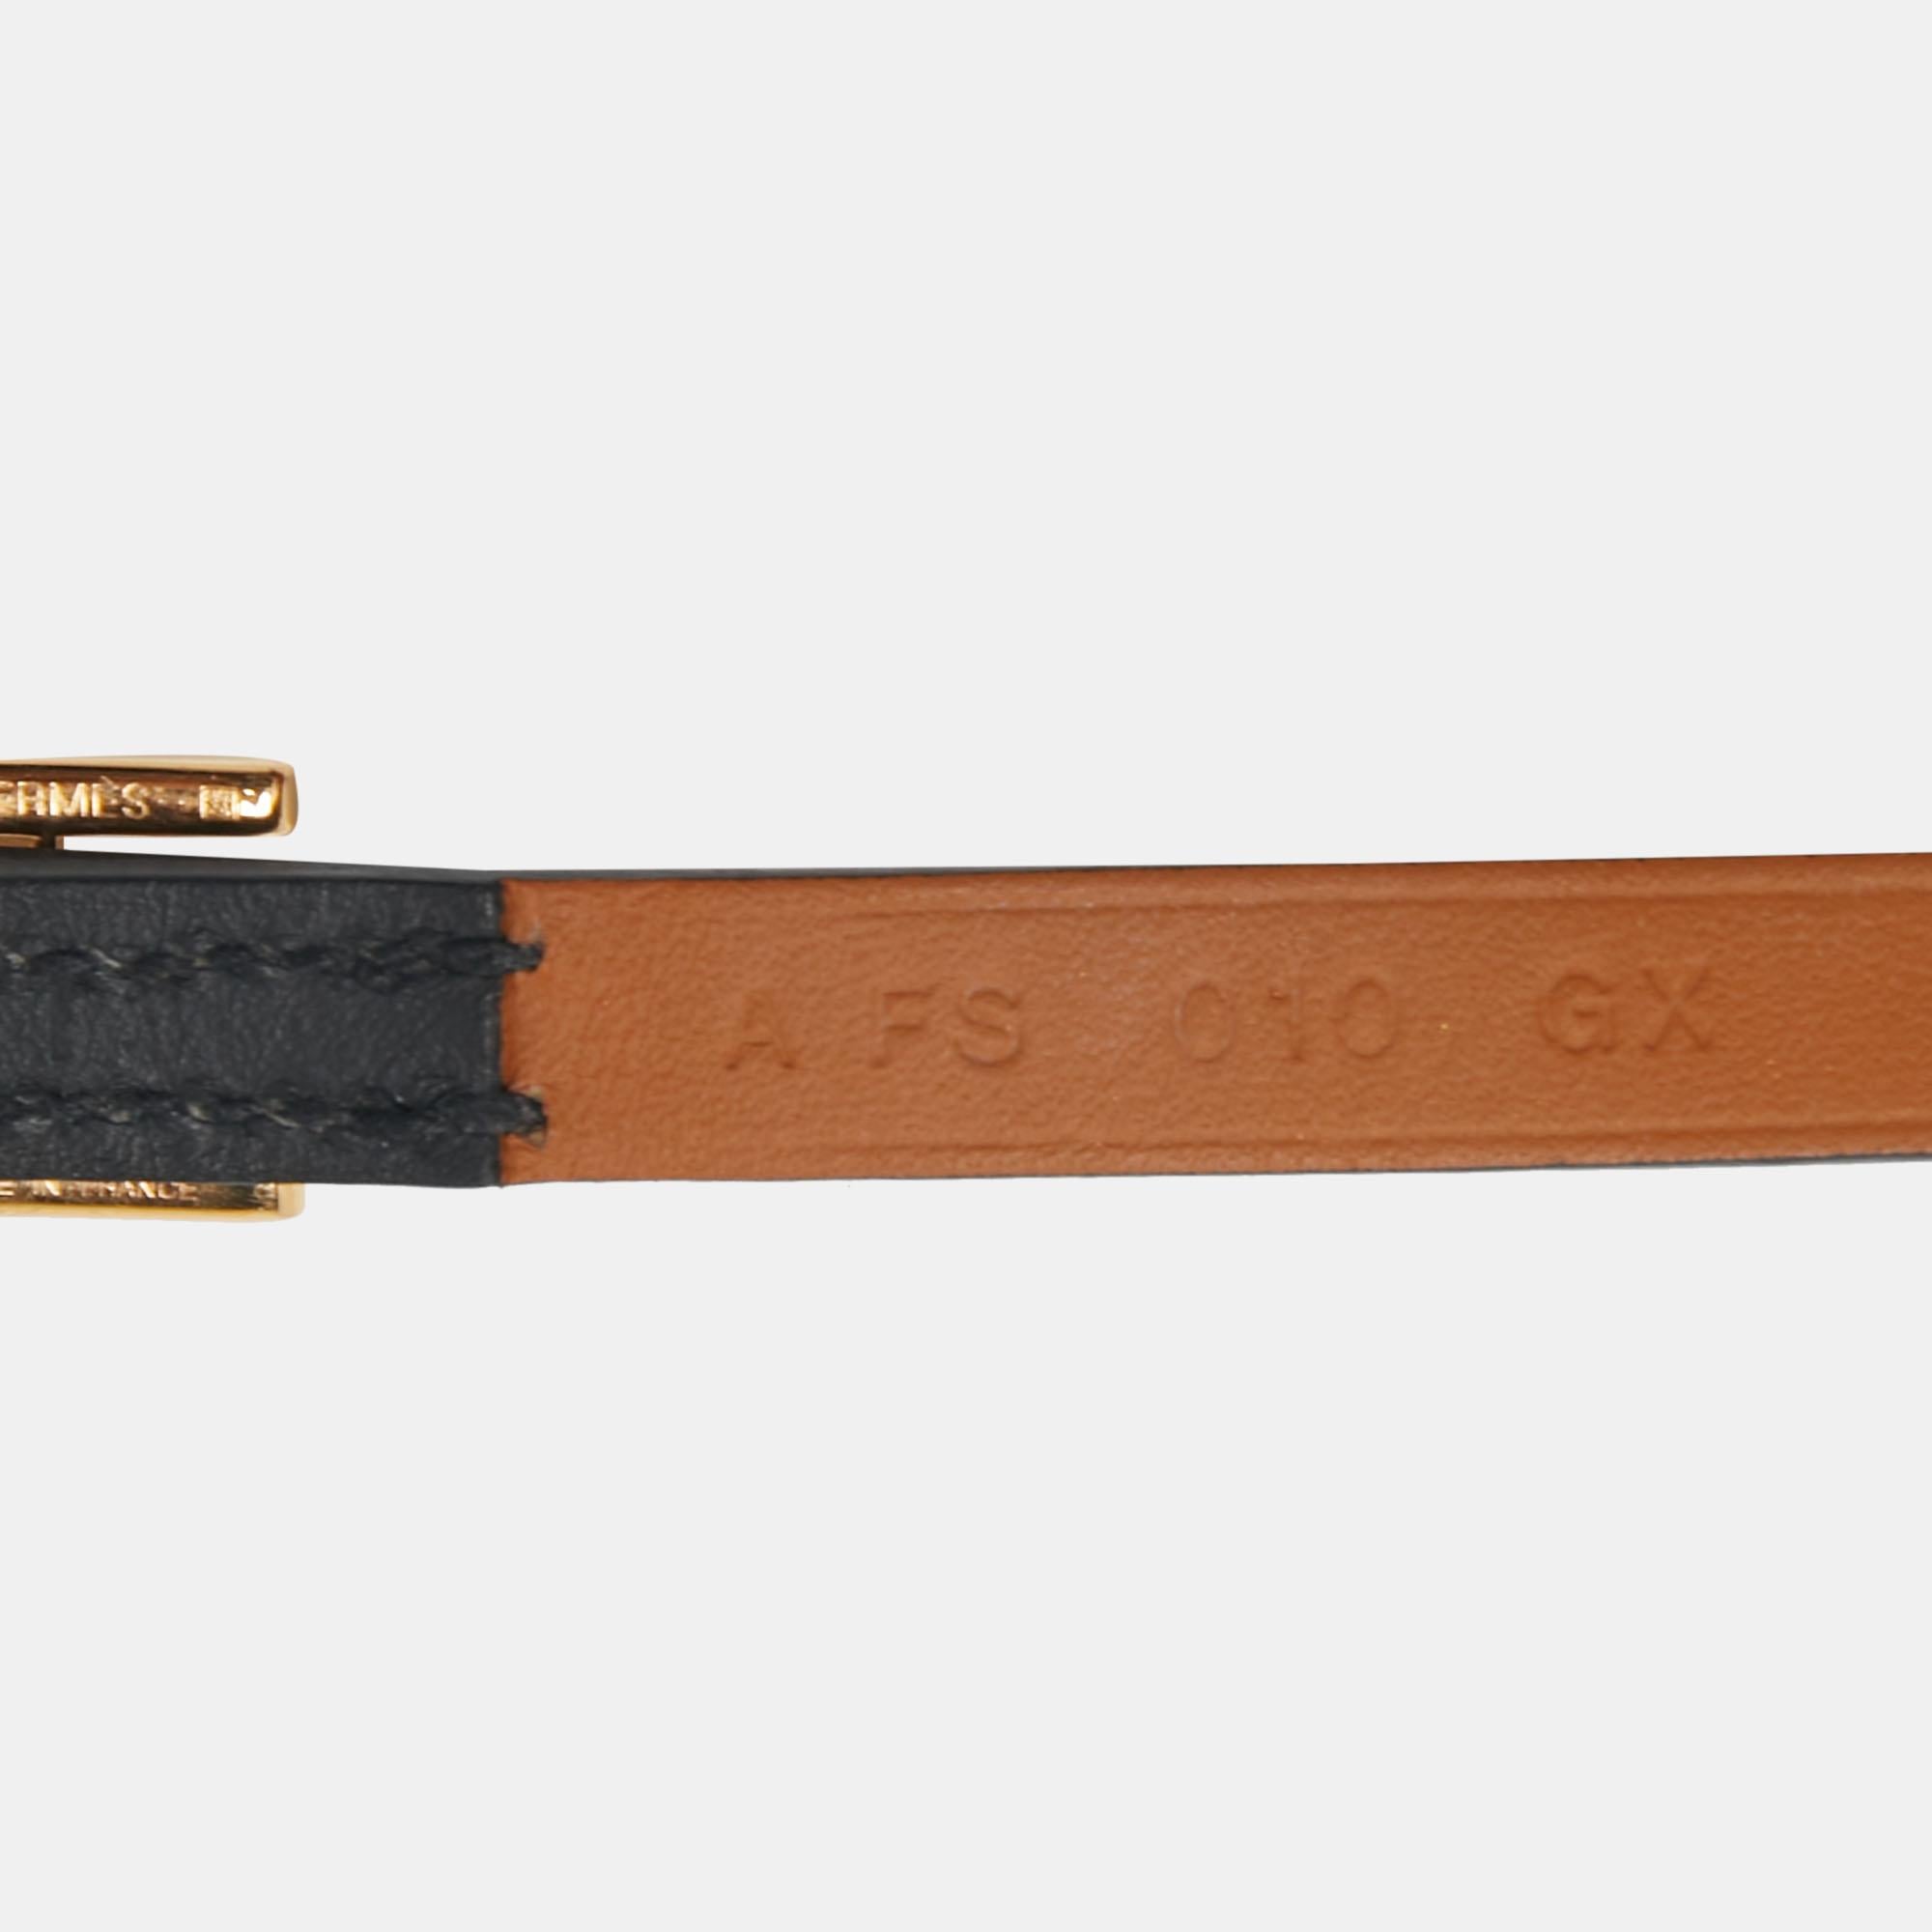 
This Hermès Hapi 3 wrap bracelet is a smart accessory that can be paired well with your casual looks. Made from leather in a black shade, it is accented with a gold-plated buckle sculpted in the shape of the iconic 'H'. The bracelet has a long